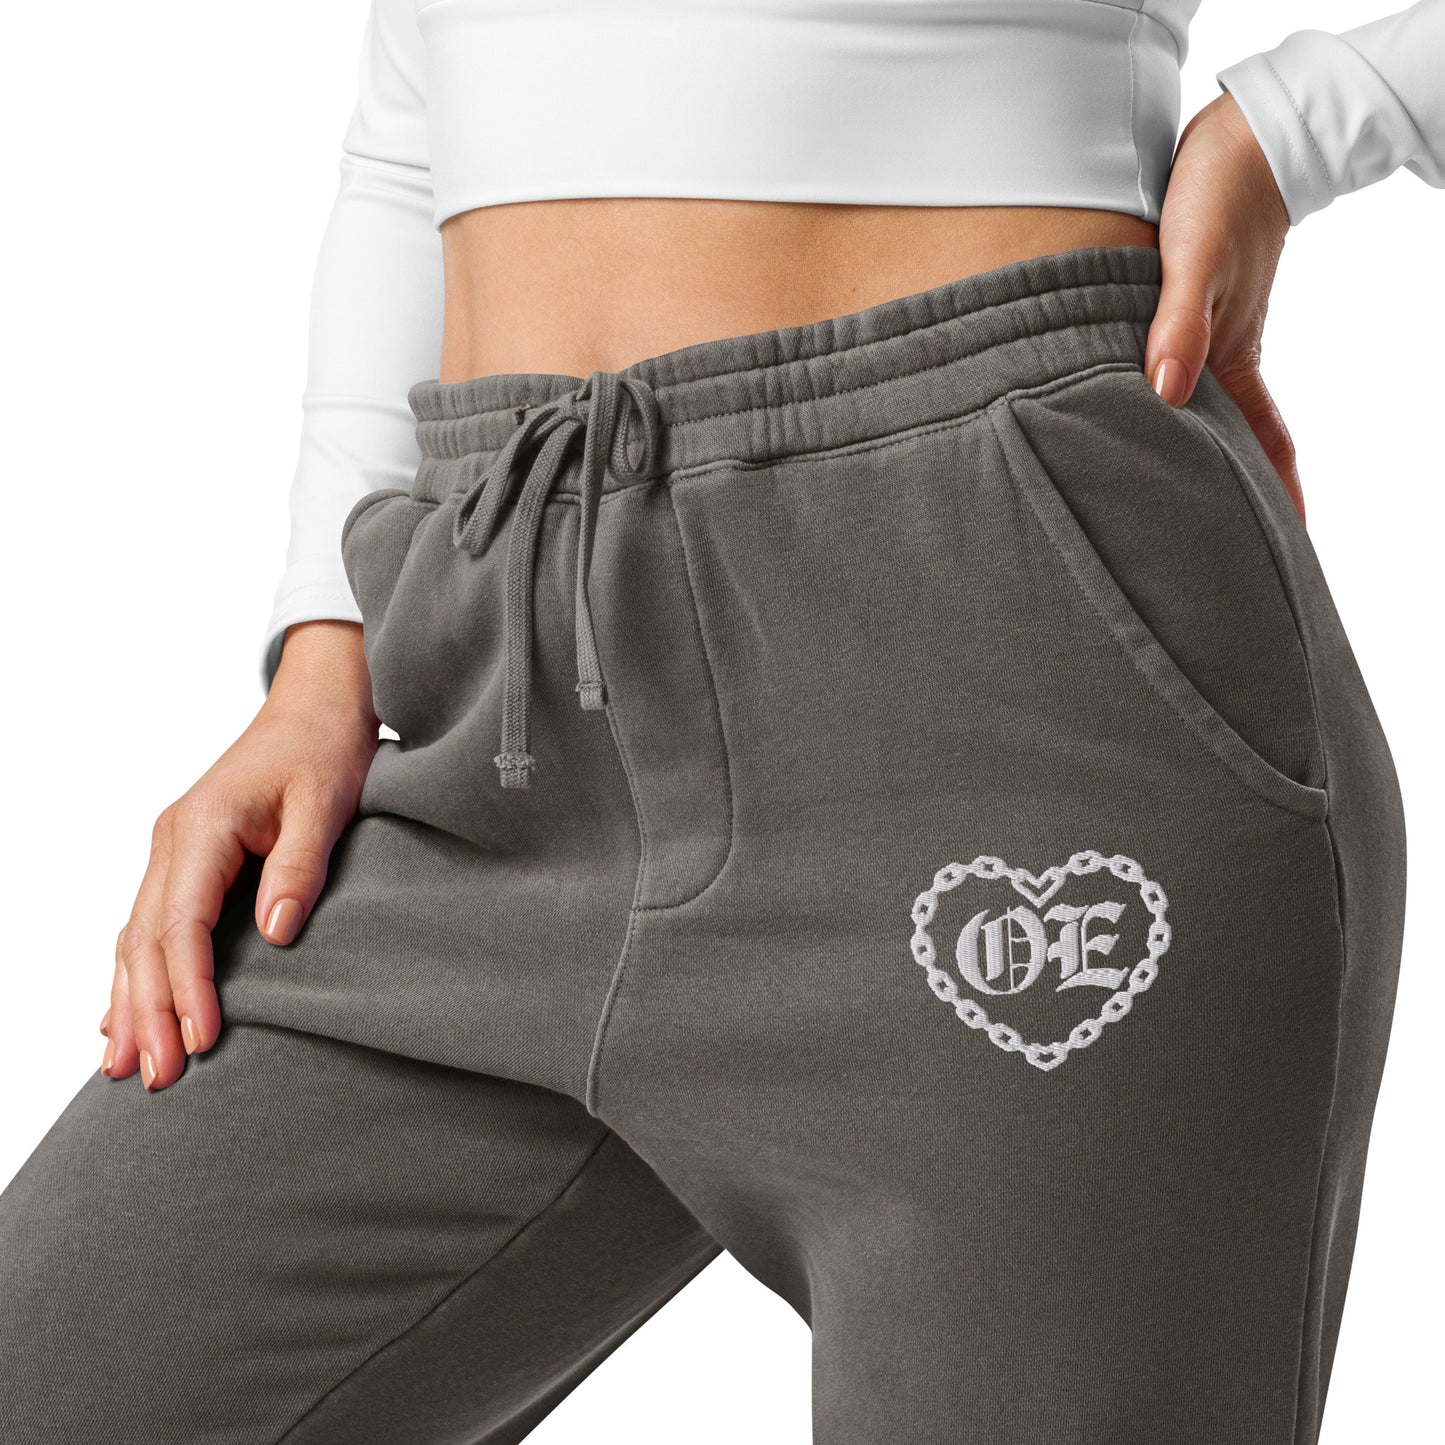 OE pigment-dyed sweatpants